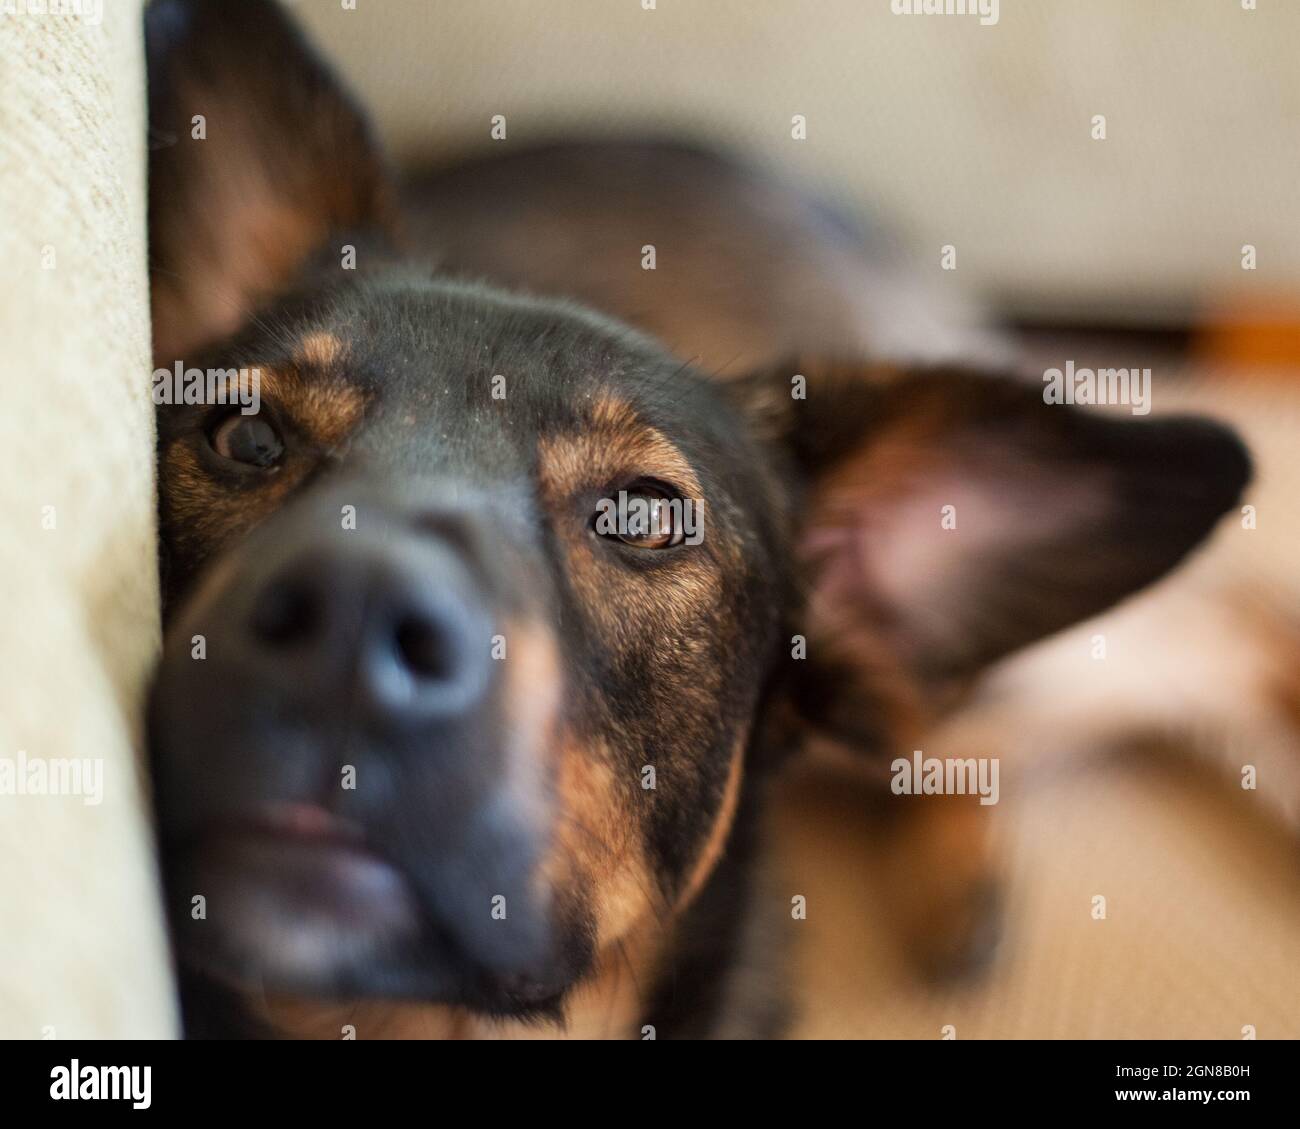 A dog with big ears rests its head while looking at the camera Stock Photo